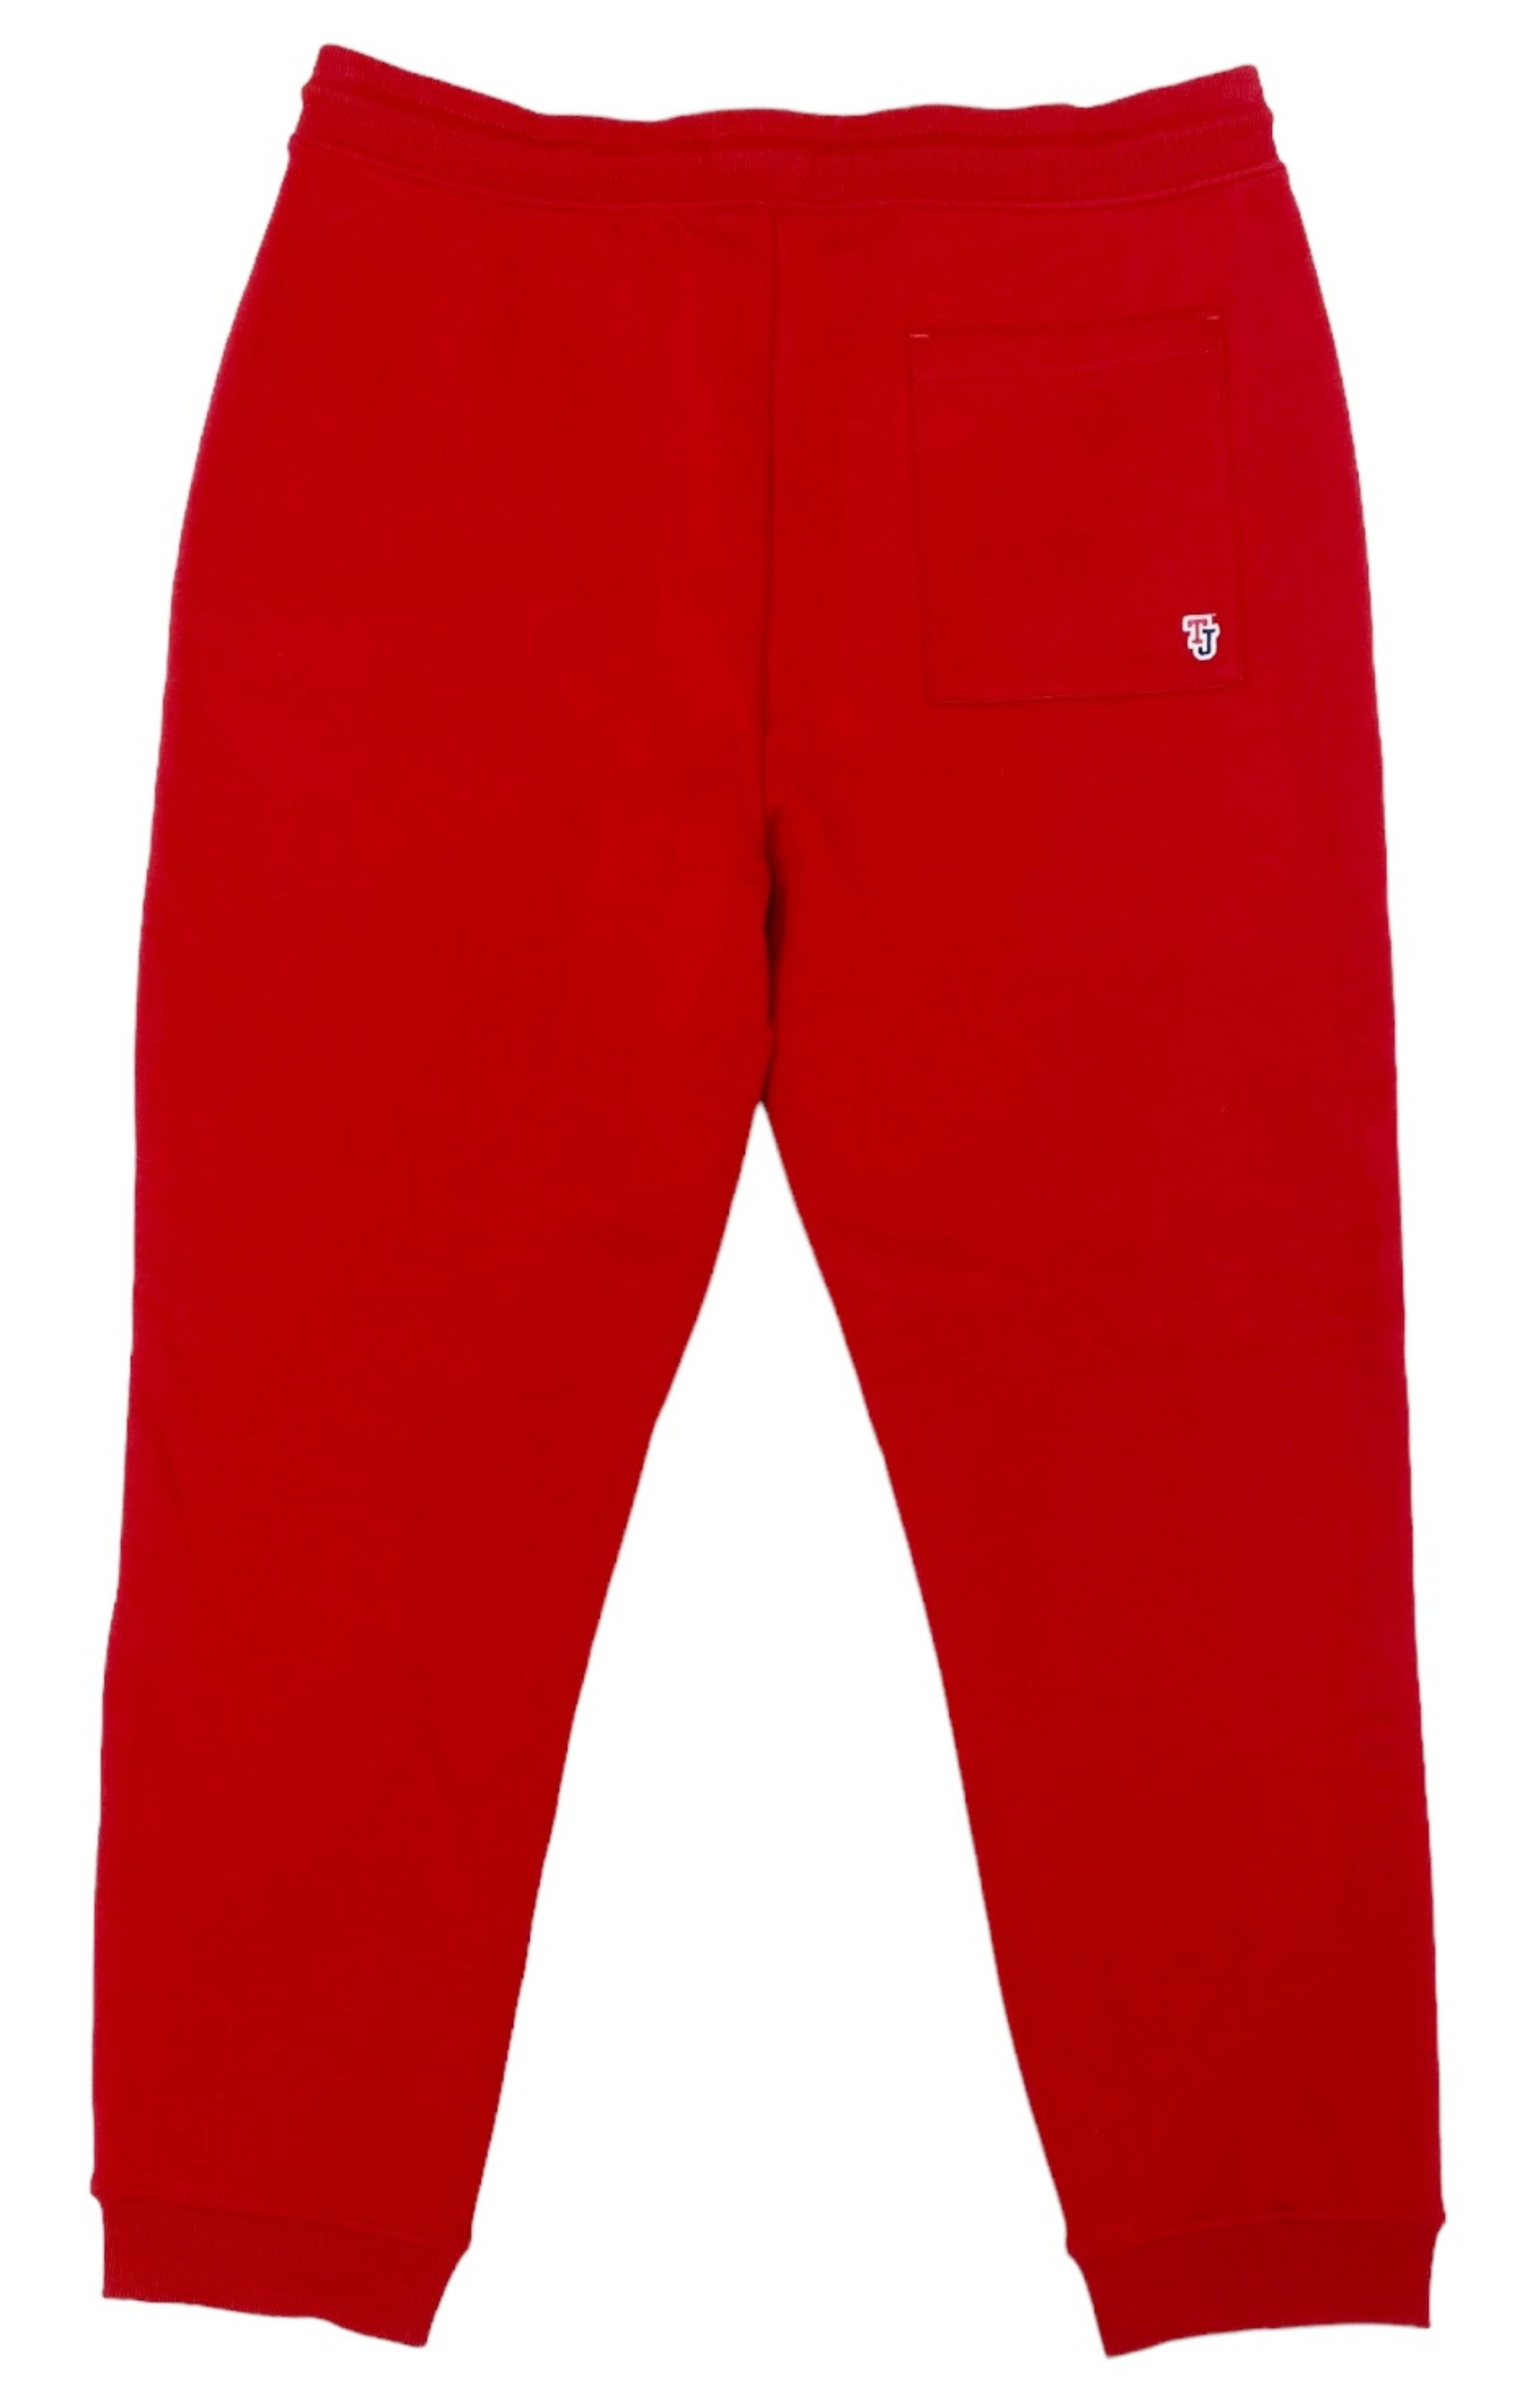 TOMMY JEANS (NEW) with tags Sweatpants Size: 2XL